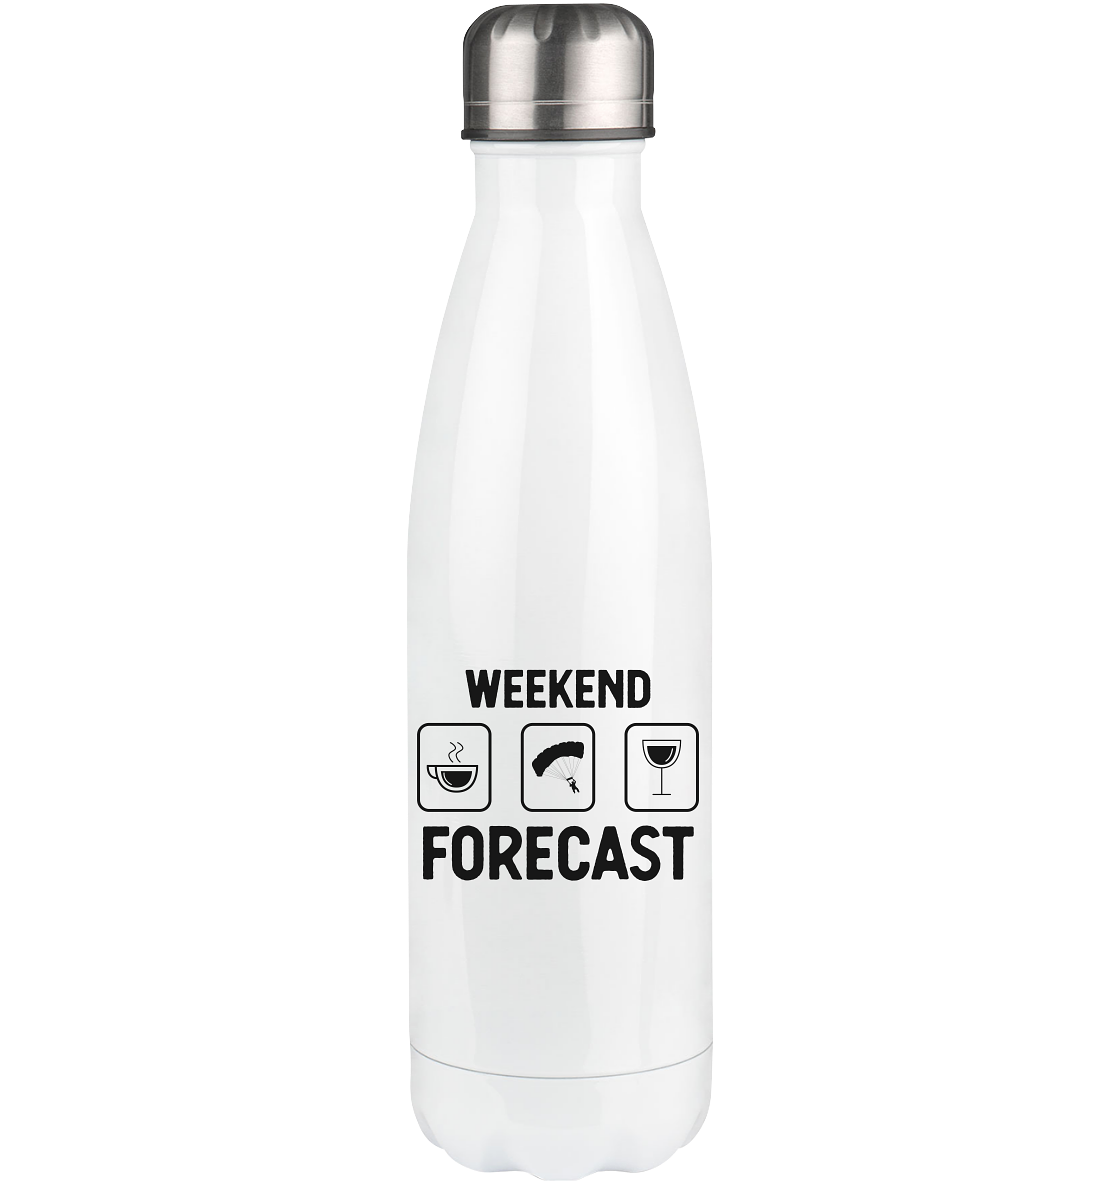 Weekend Forecast 1 - Edelstahl Thermosflasche berge 500ml